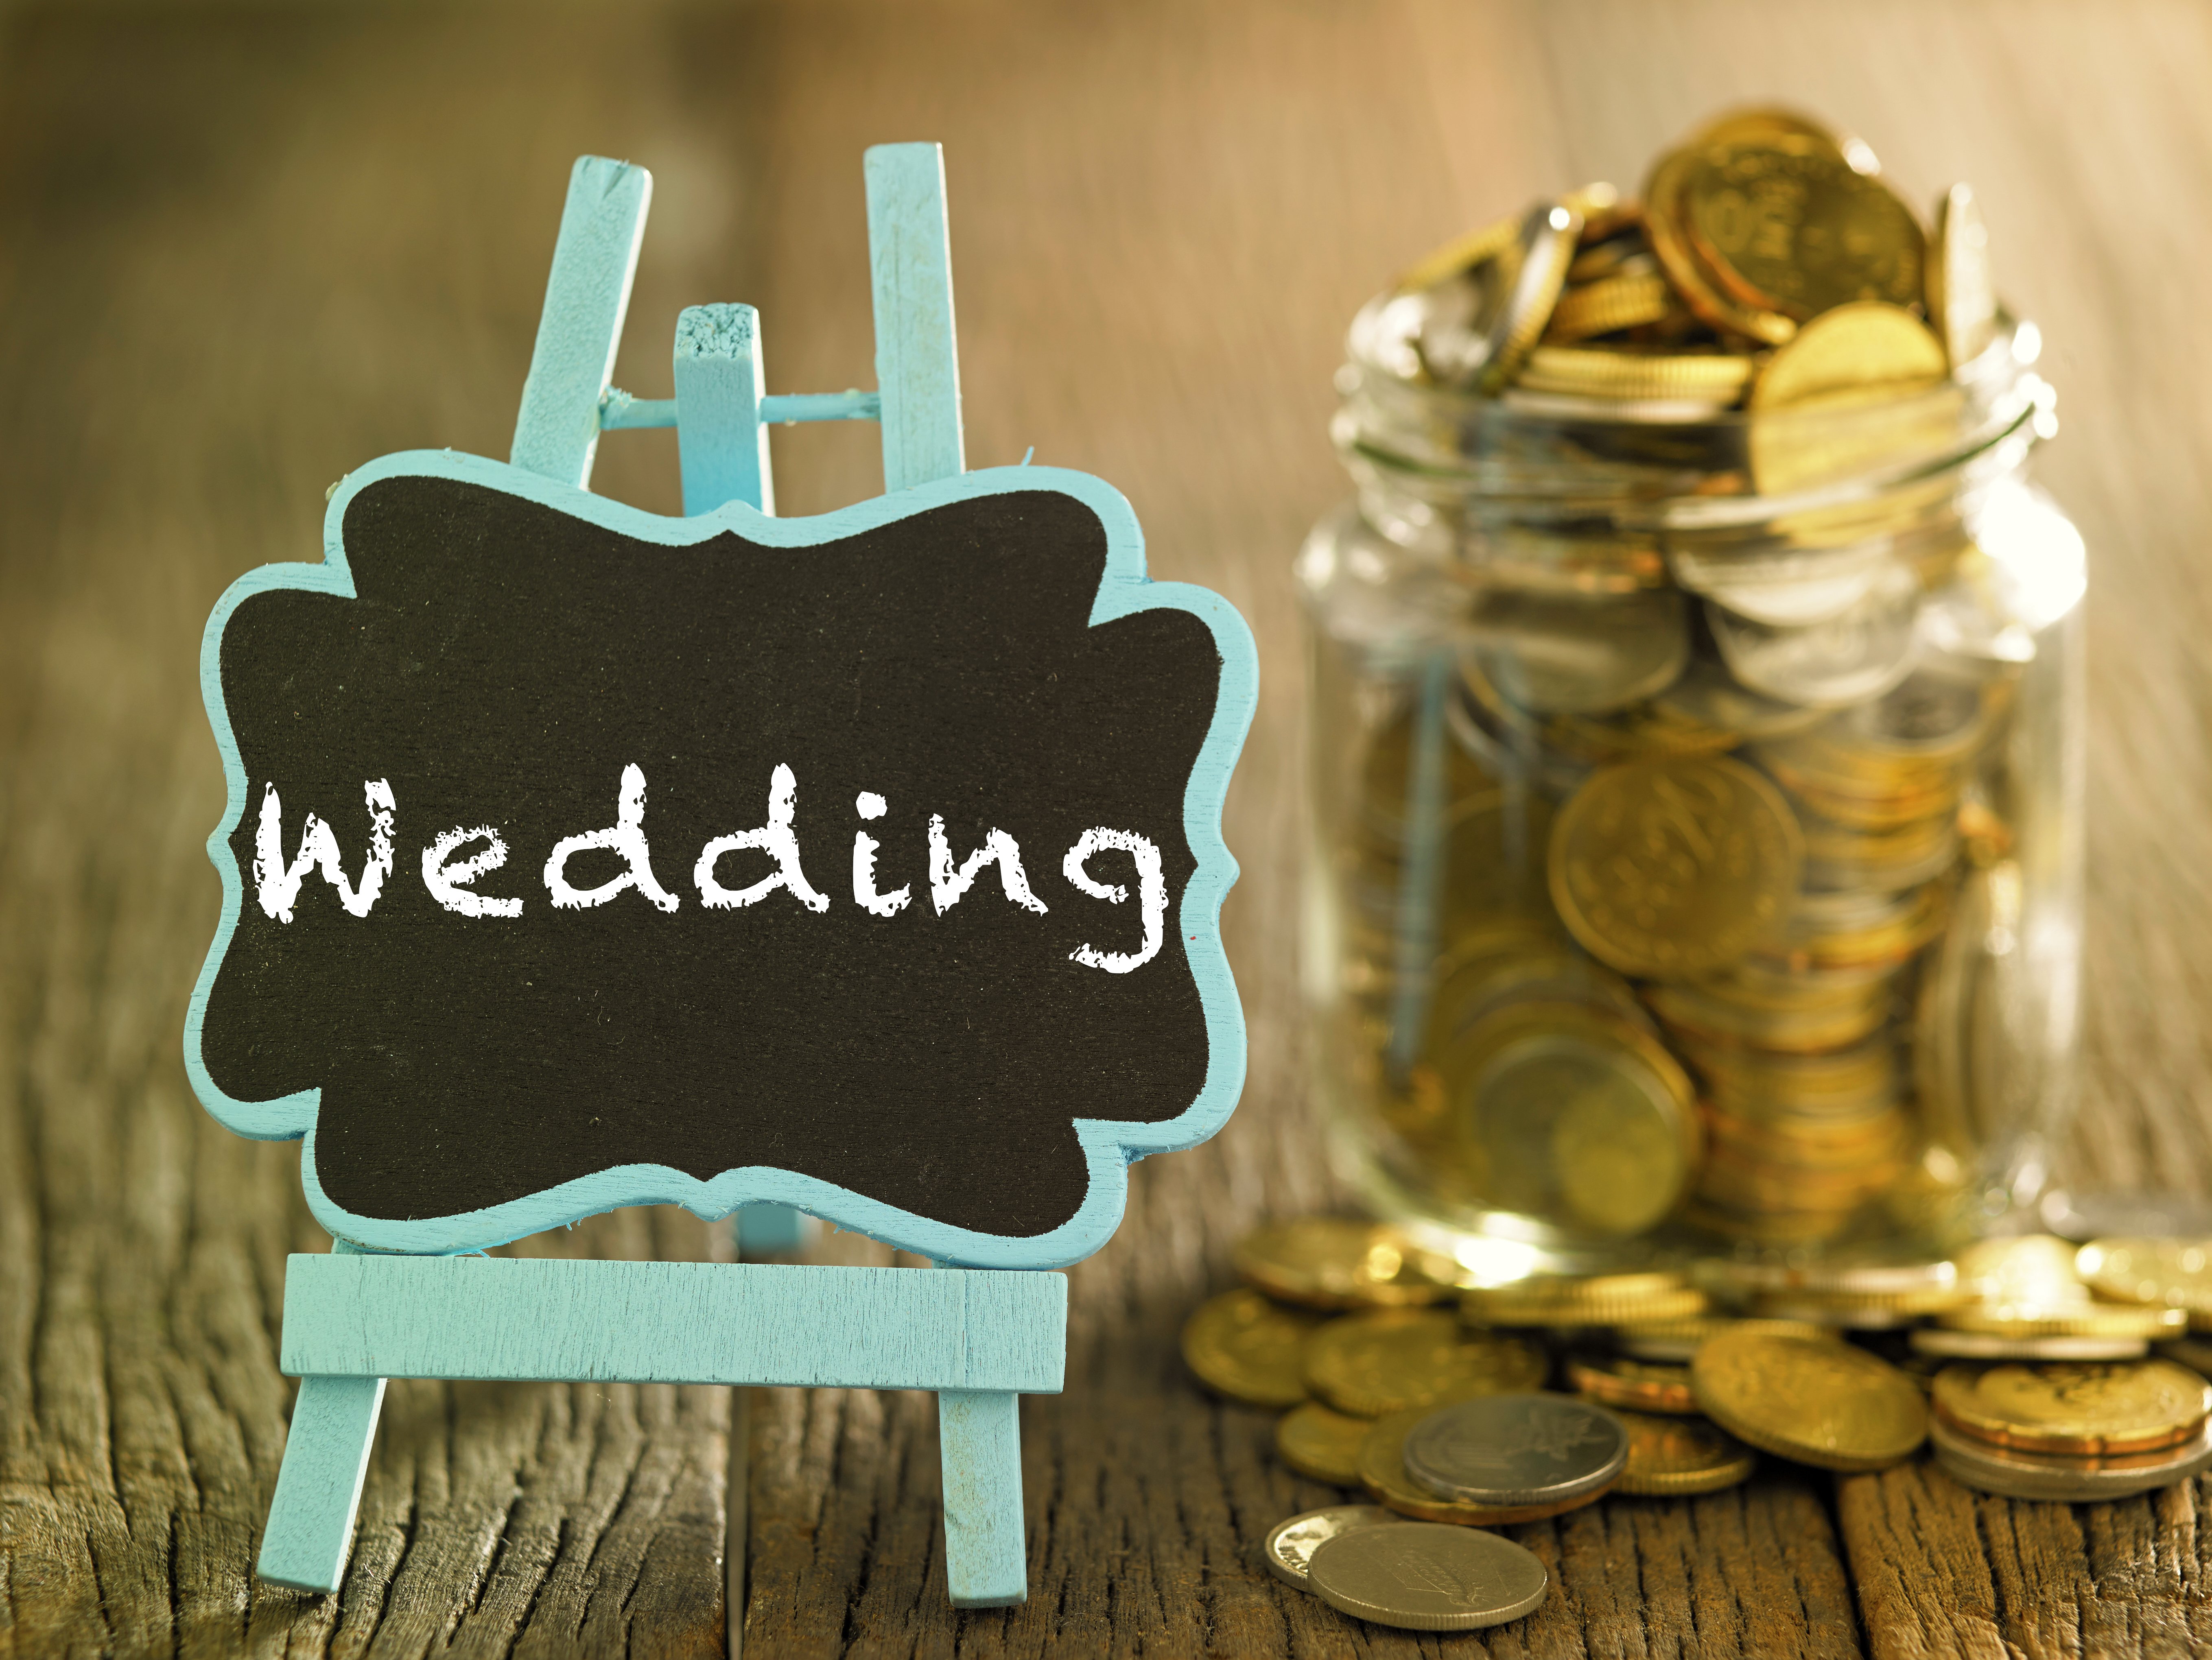 Jar full of savings for the big day. | Photo: Shutterstock